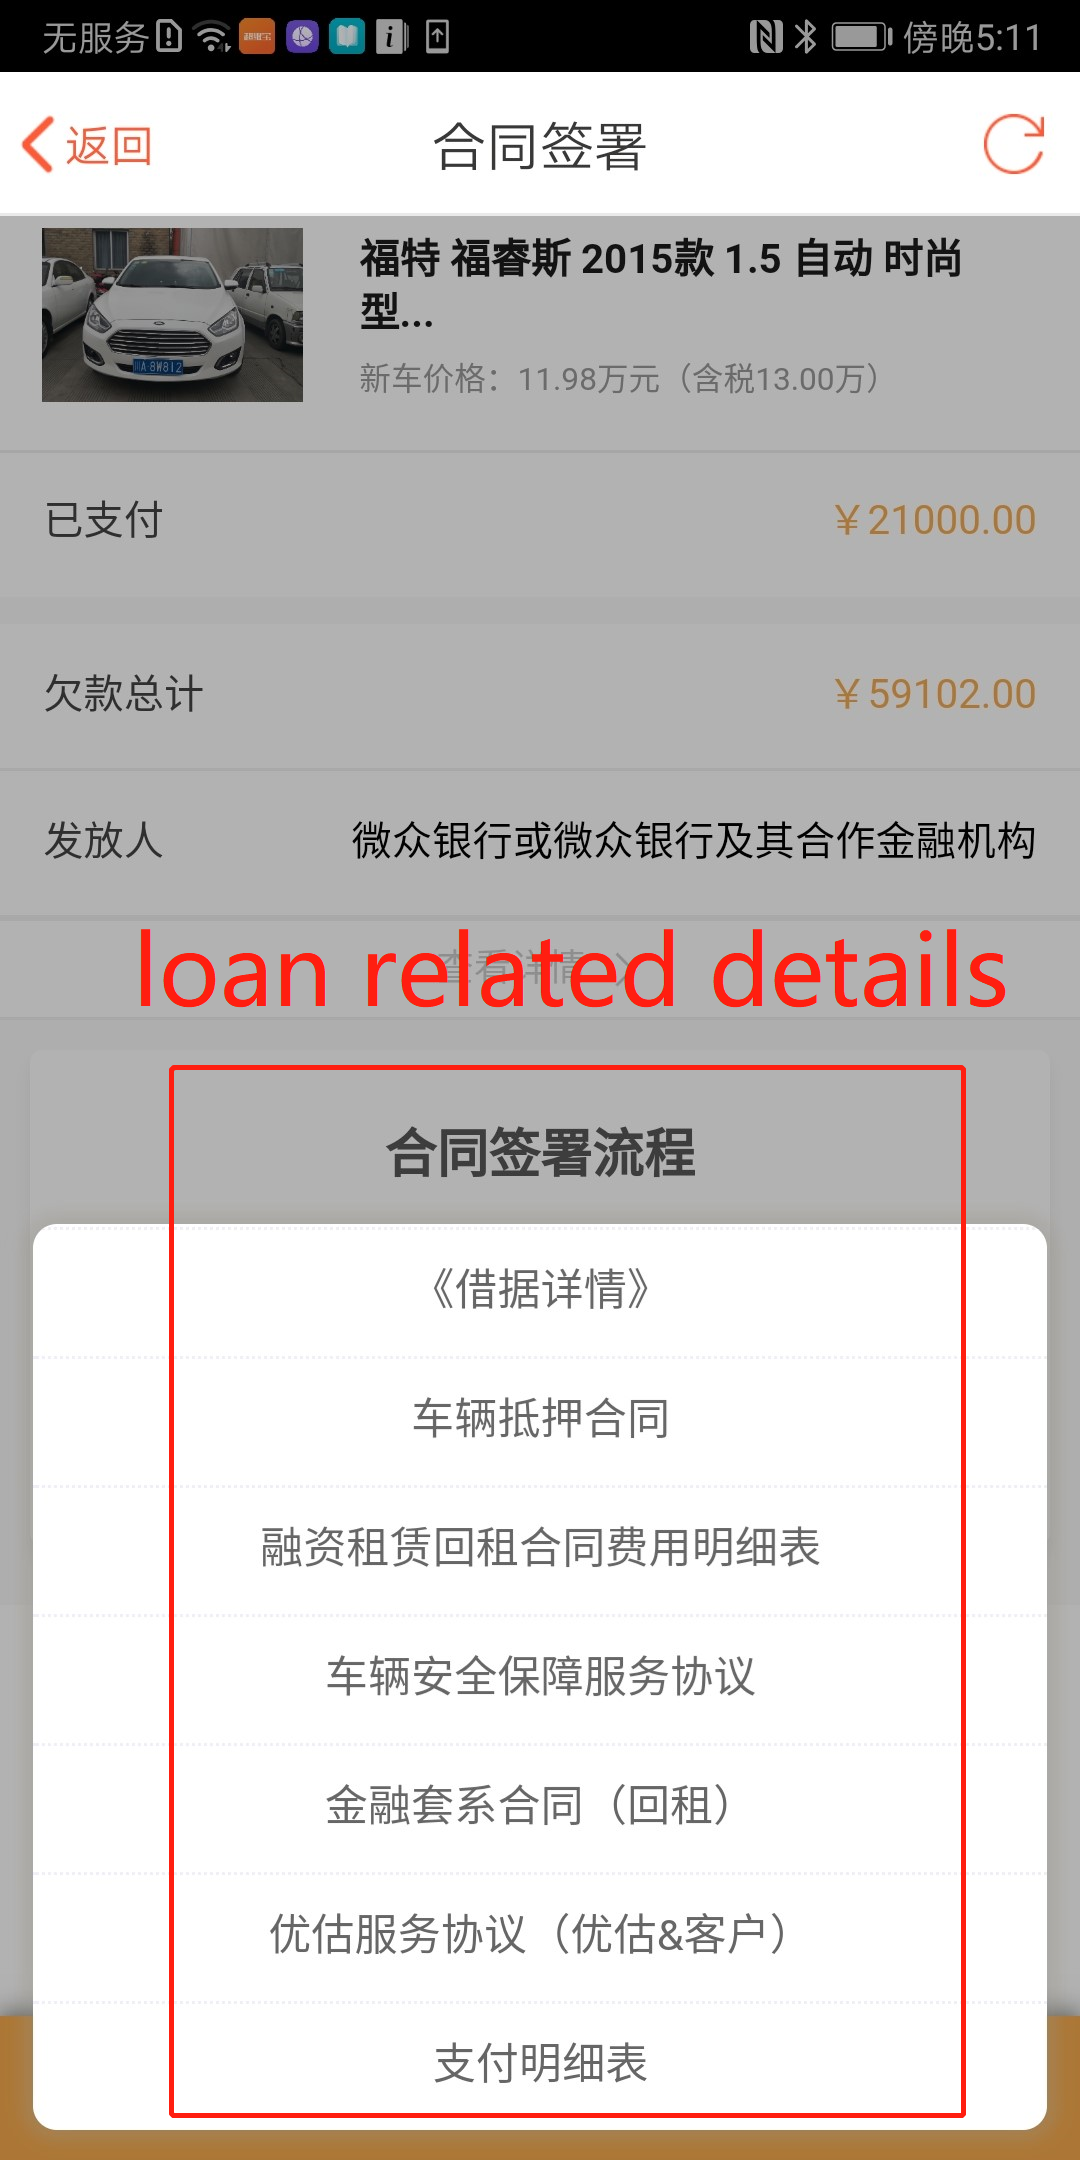 Example 4 - Loan related details, including contract and agreement, payment summary, etc.